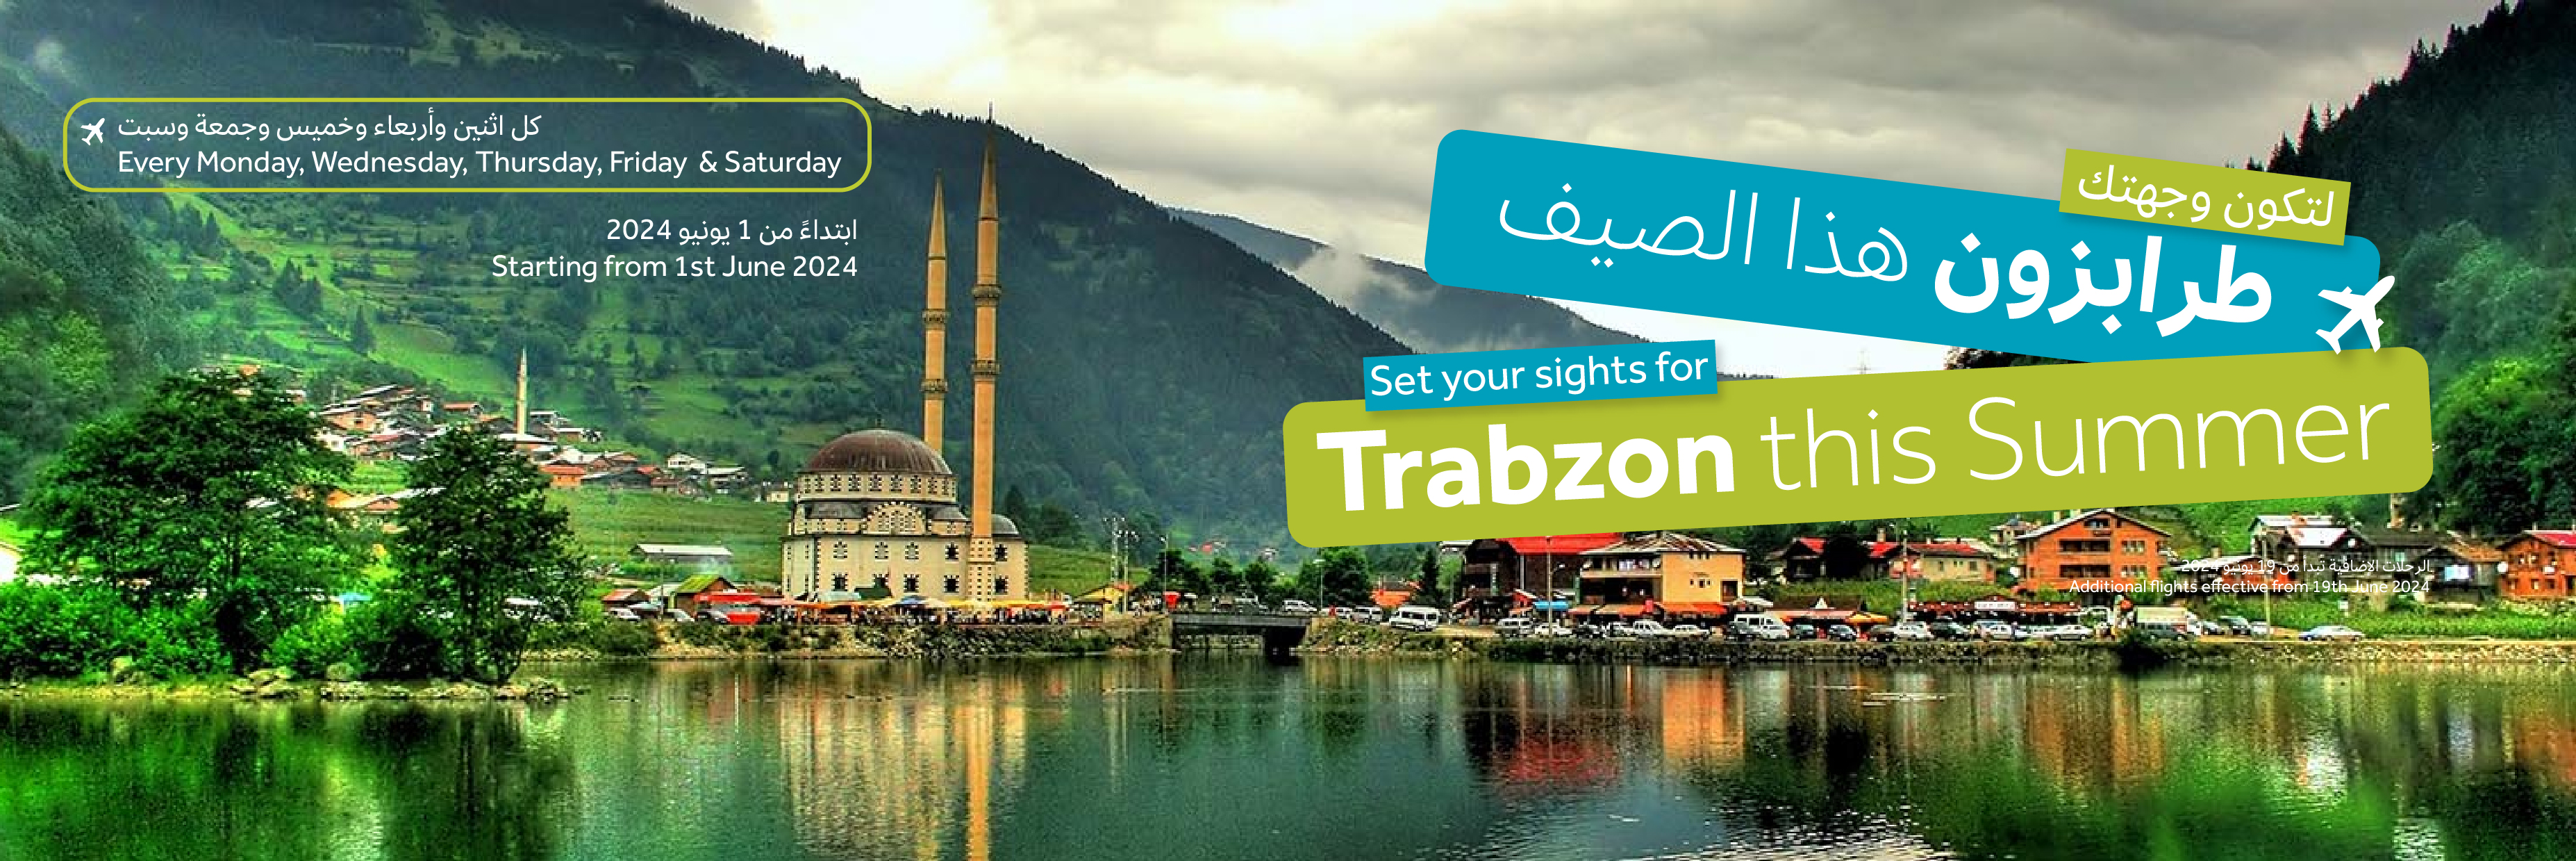 Trabzon is Back This Summer